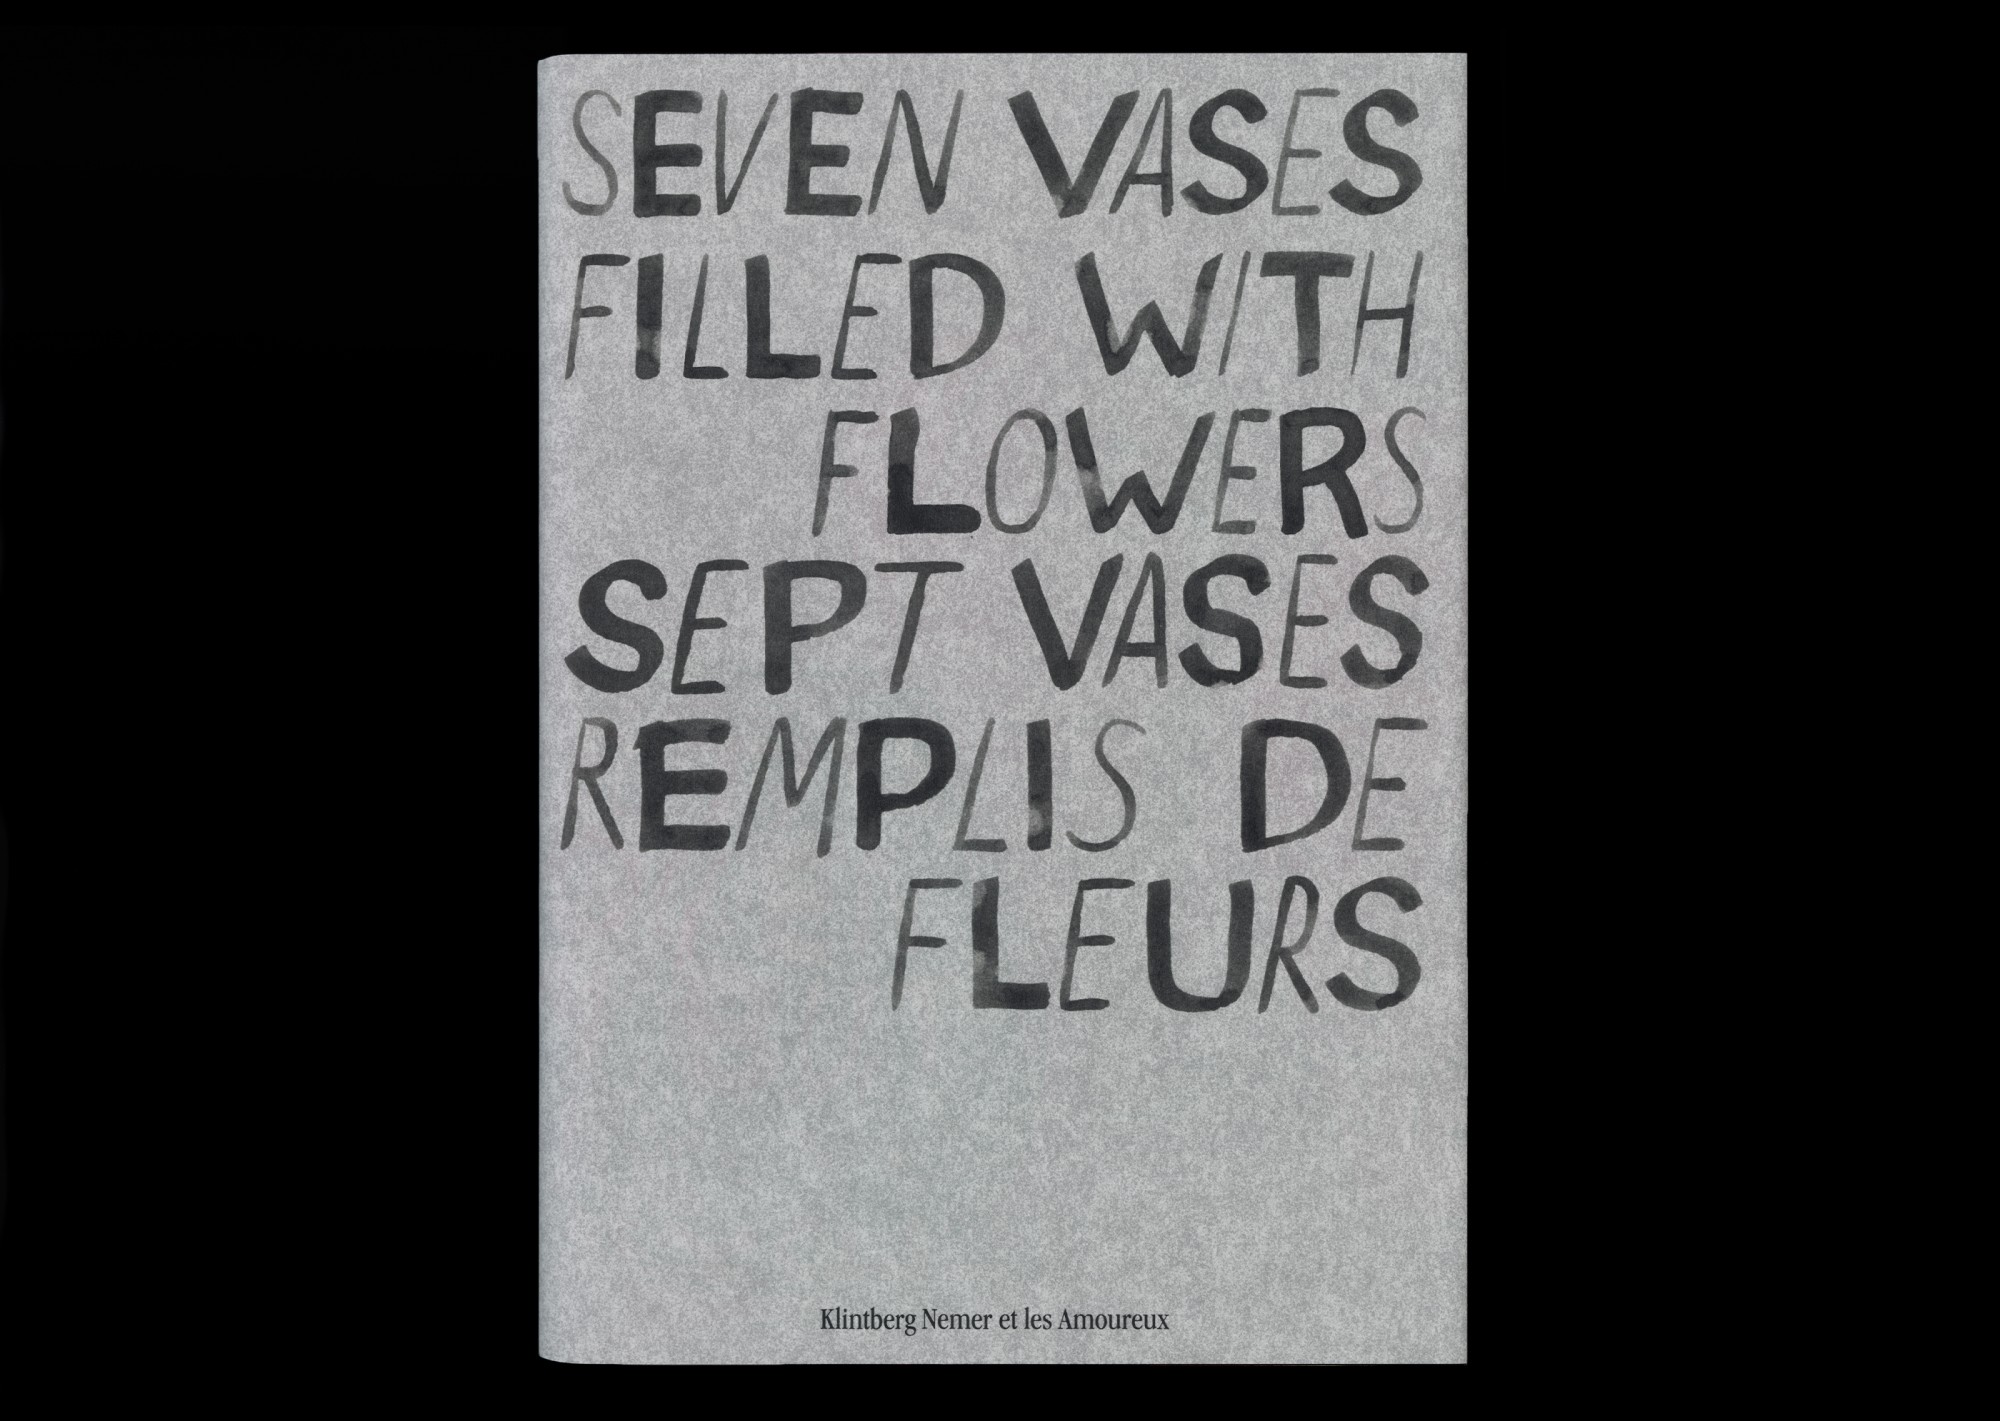 Seven vases filled with flowers 1